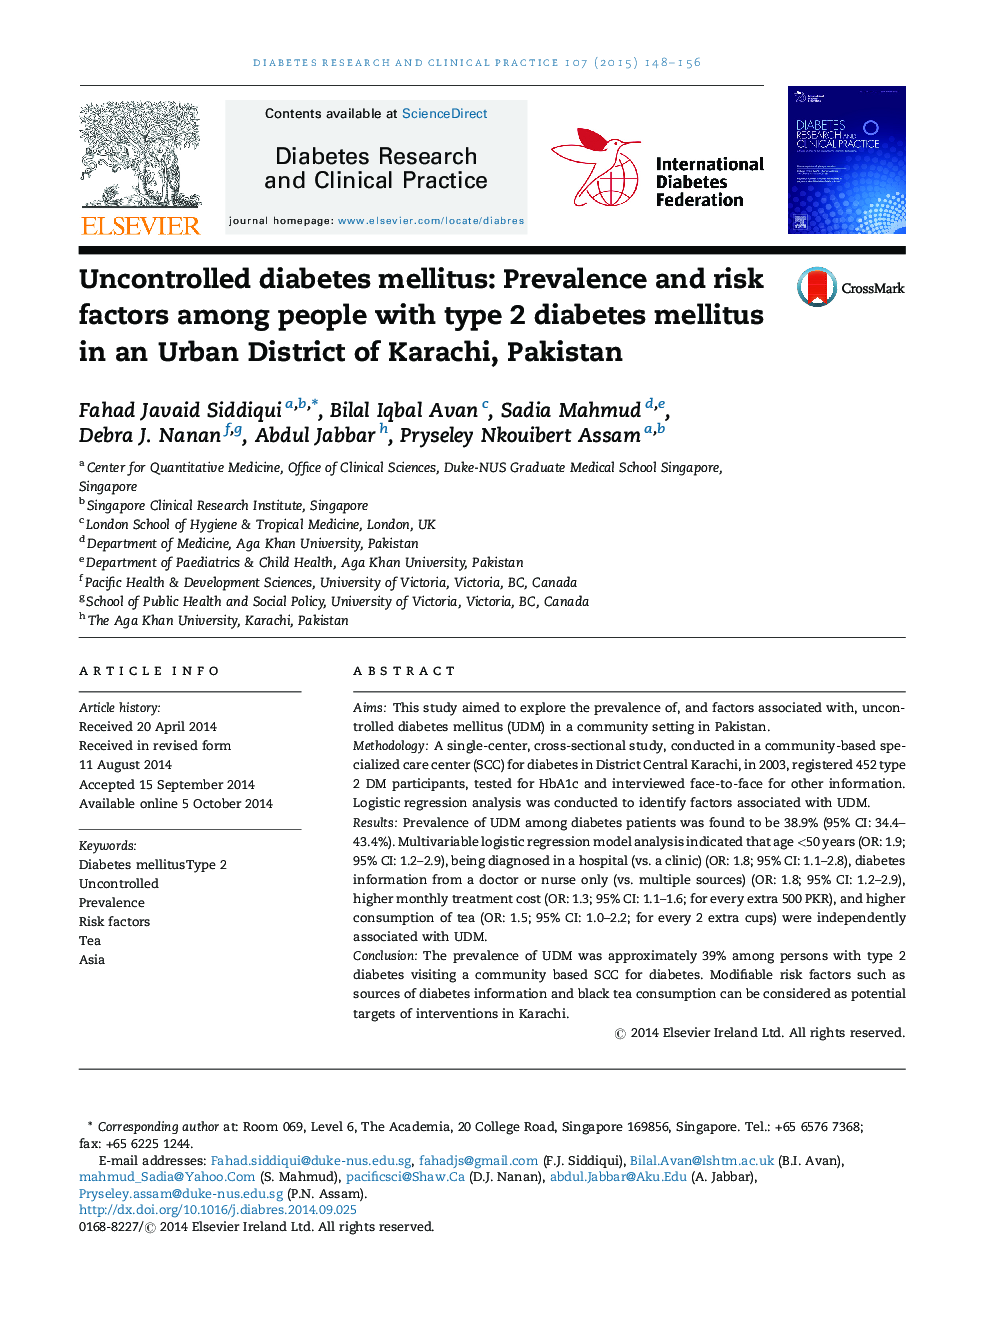 Uncontrolled diabetes mellitus: Prevalence and risk factors among people with type 2 diabetes mellitus in an Urban District of Karachi, Pakistan